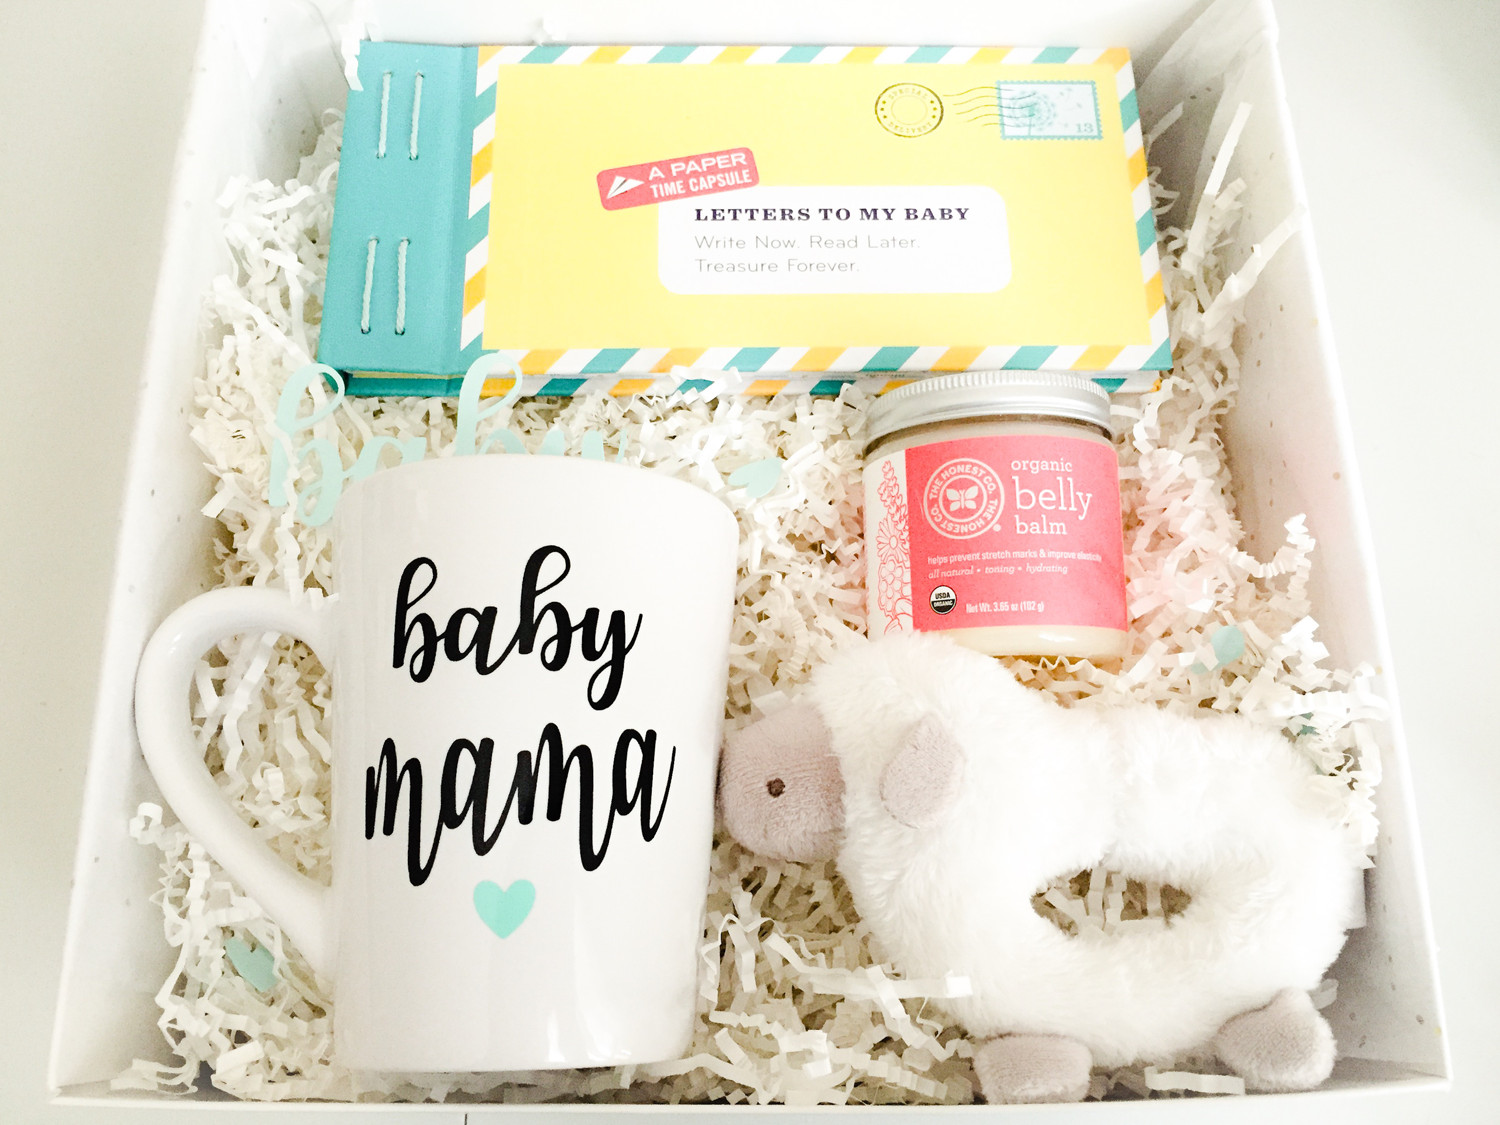 Gift Ideas For Expectant Mothers
 Pin on Gift Baskets